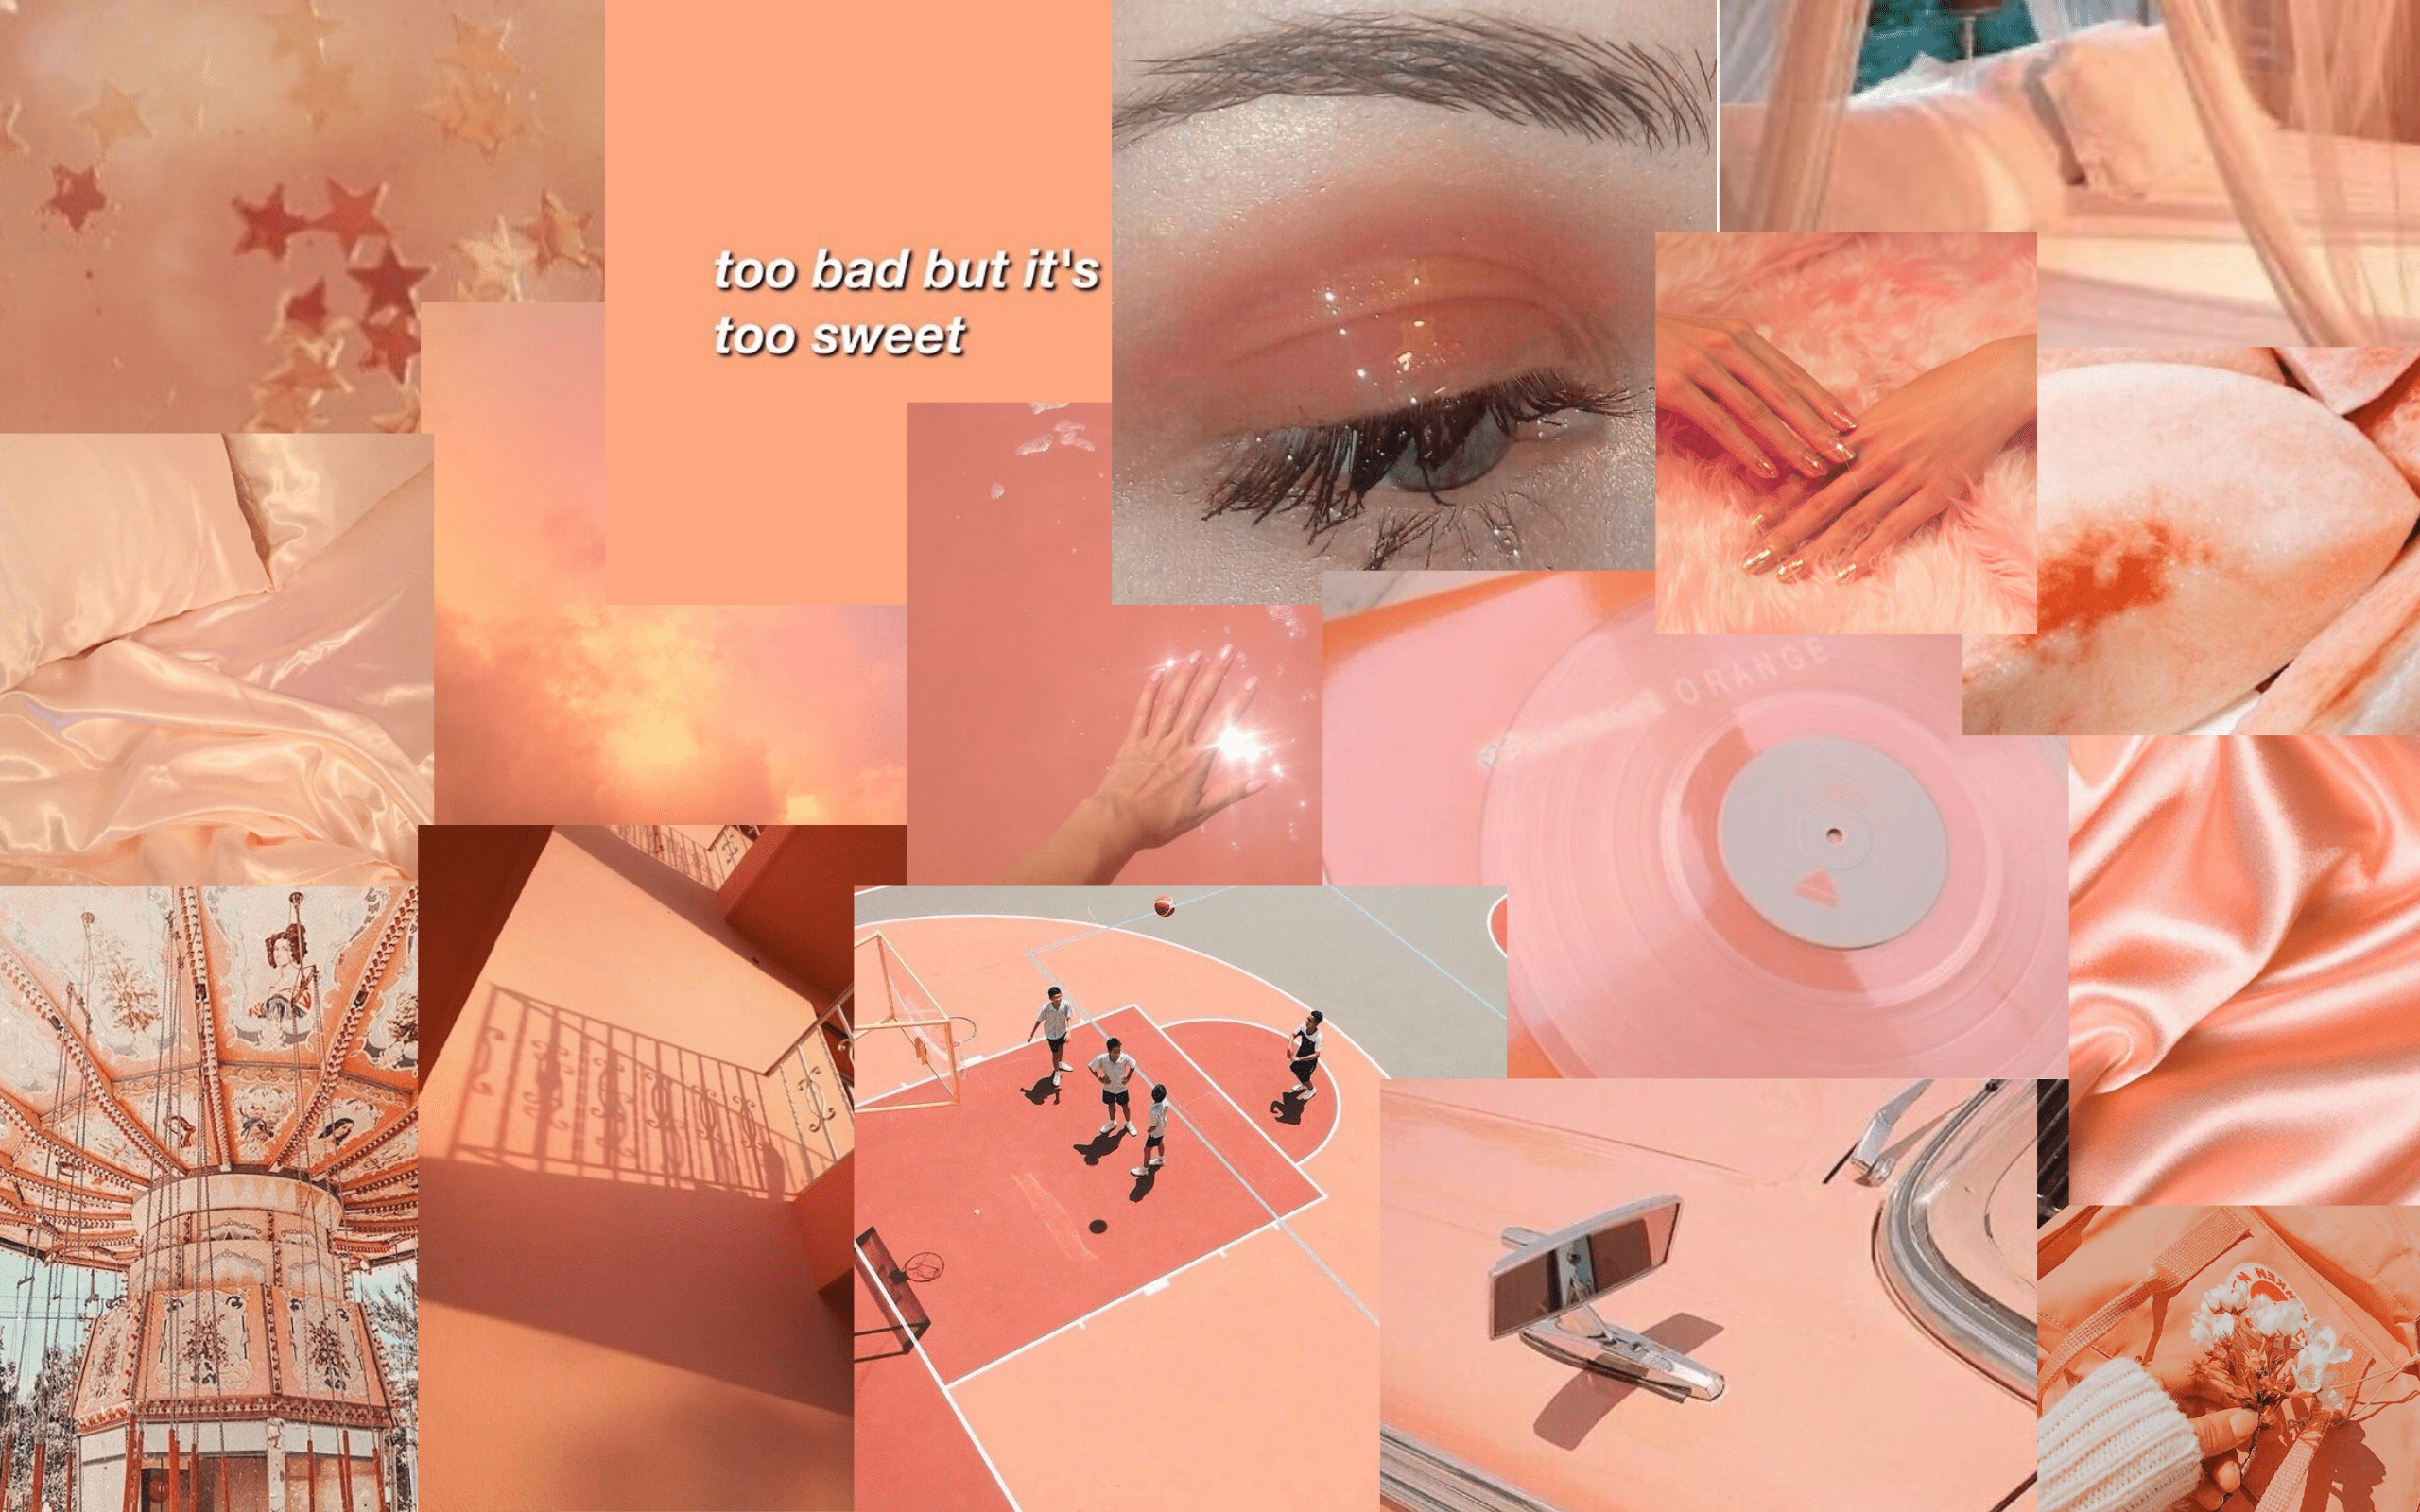 Aesthetic collage of pink and orange images including a roller coaster, an eye, and a basketball court. - Peach